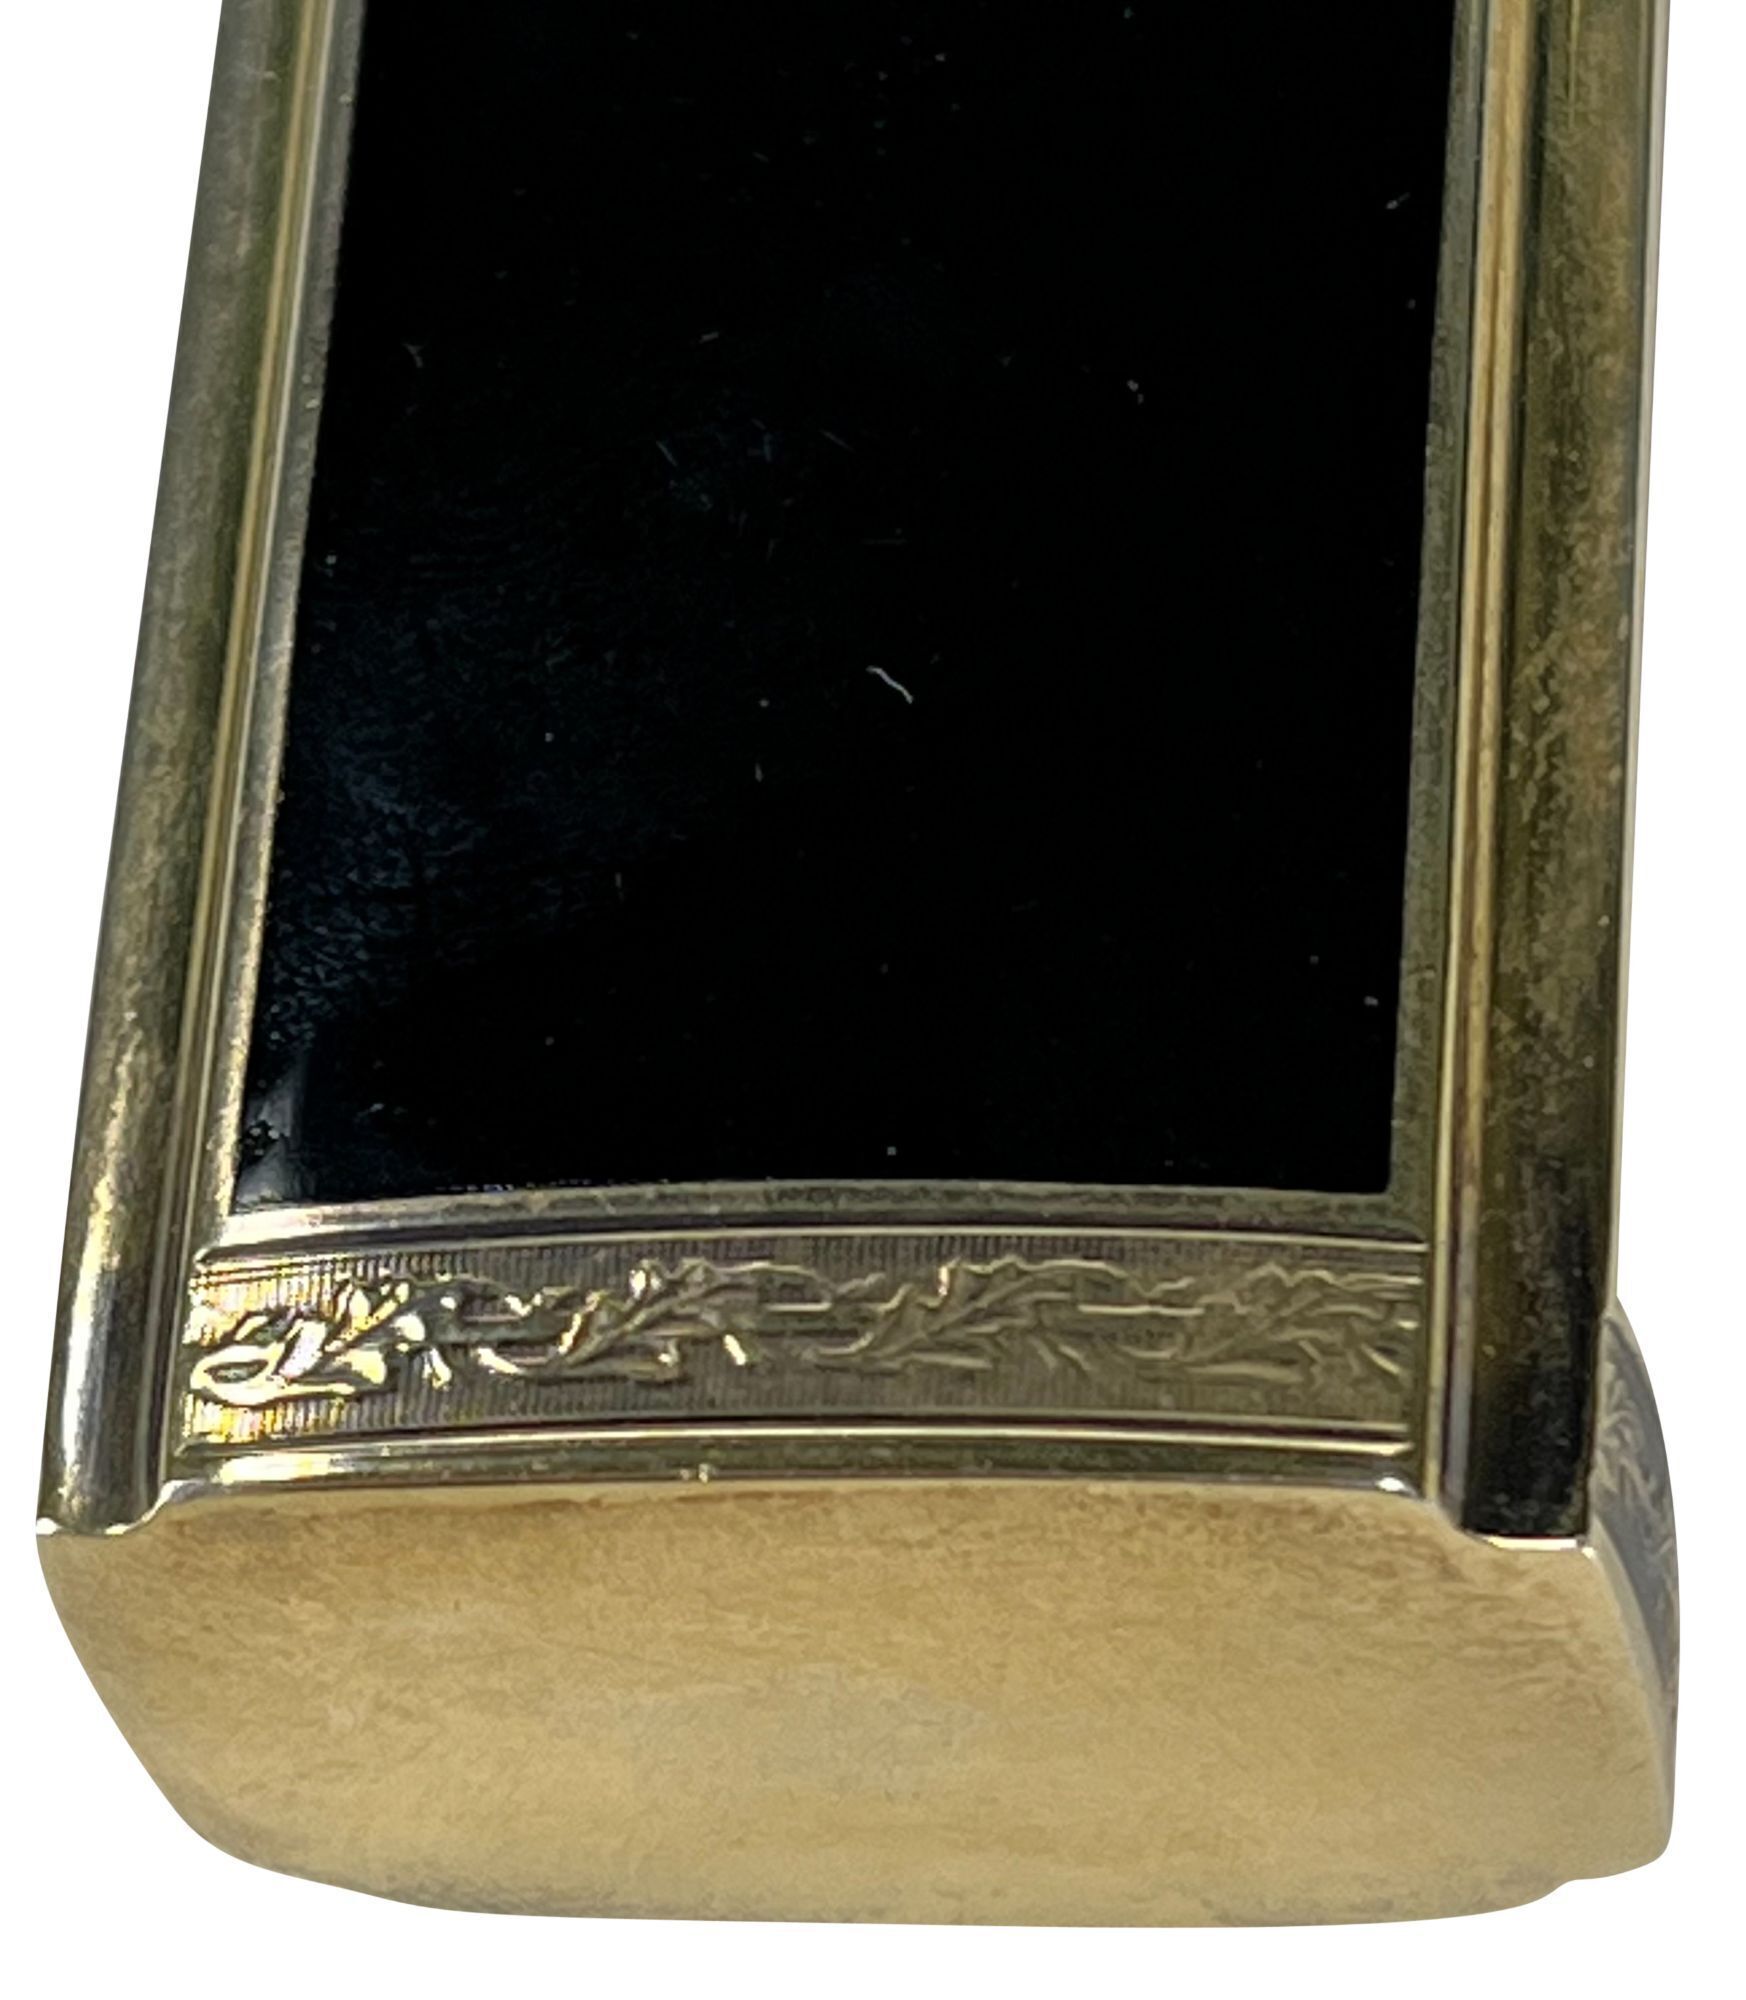 Ghiso Art Deco French Hallmarked Silver and Lacquer Box, Circa 1930 - 3